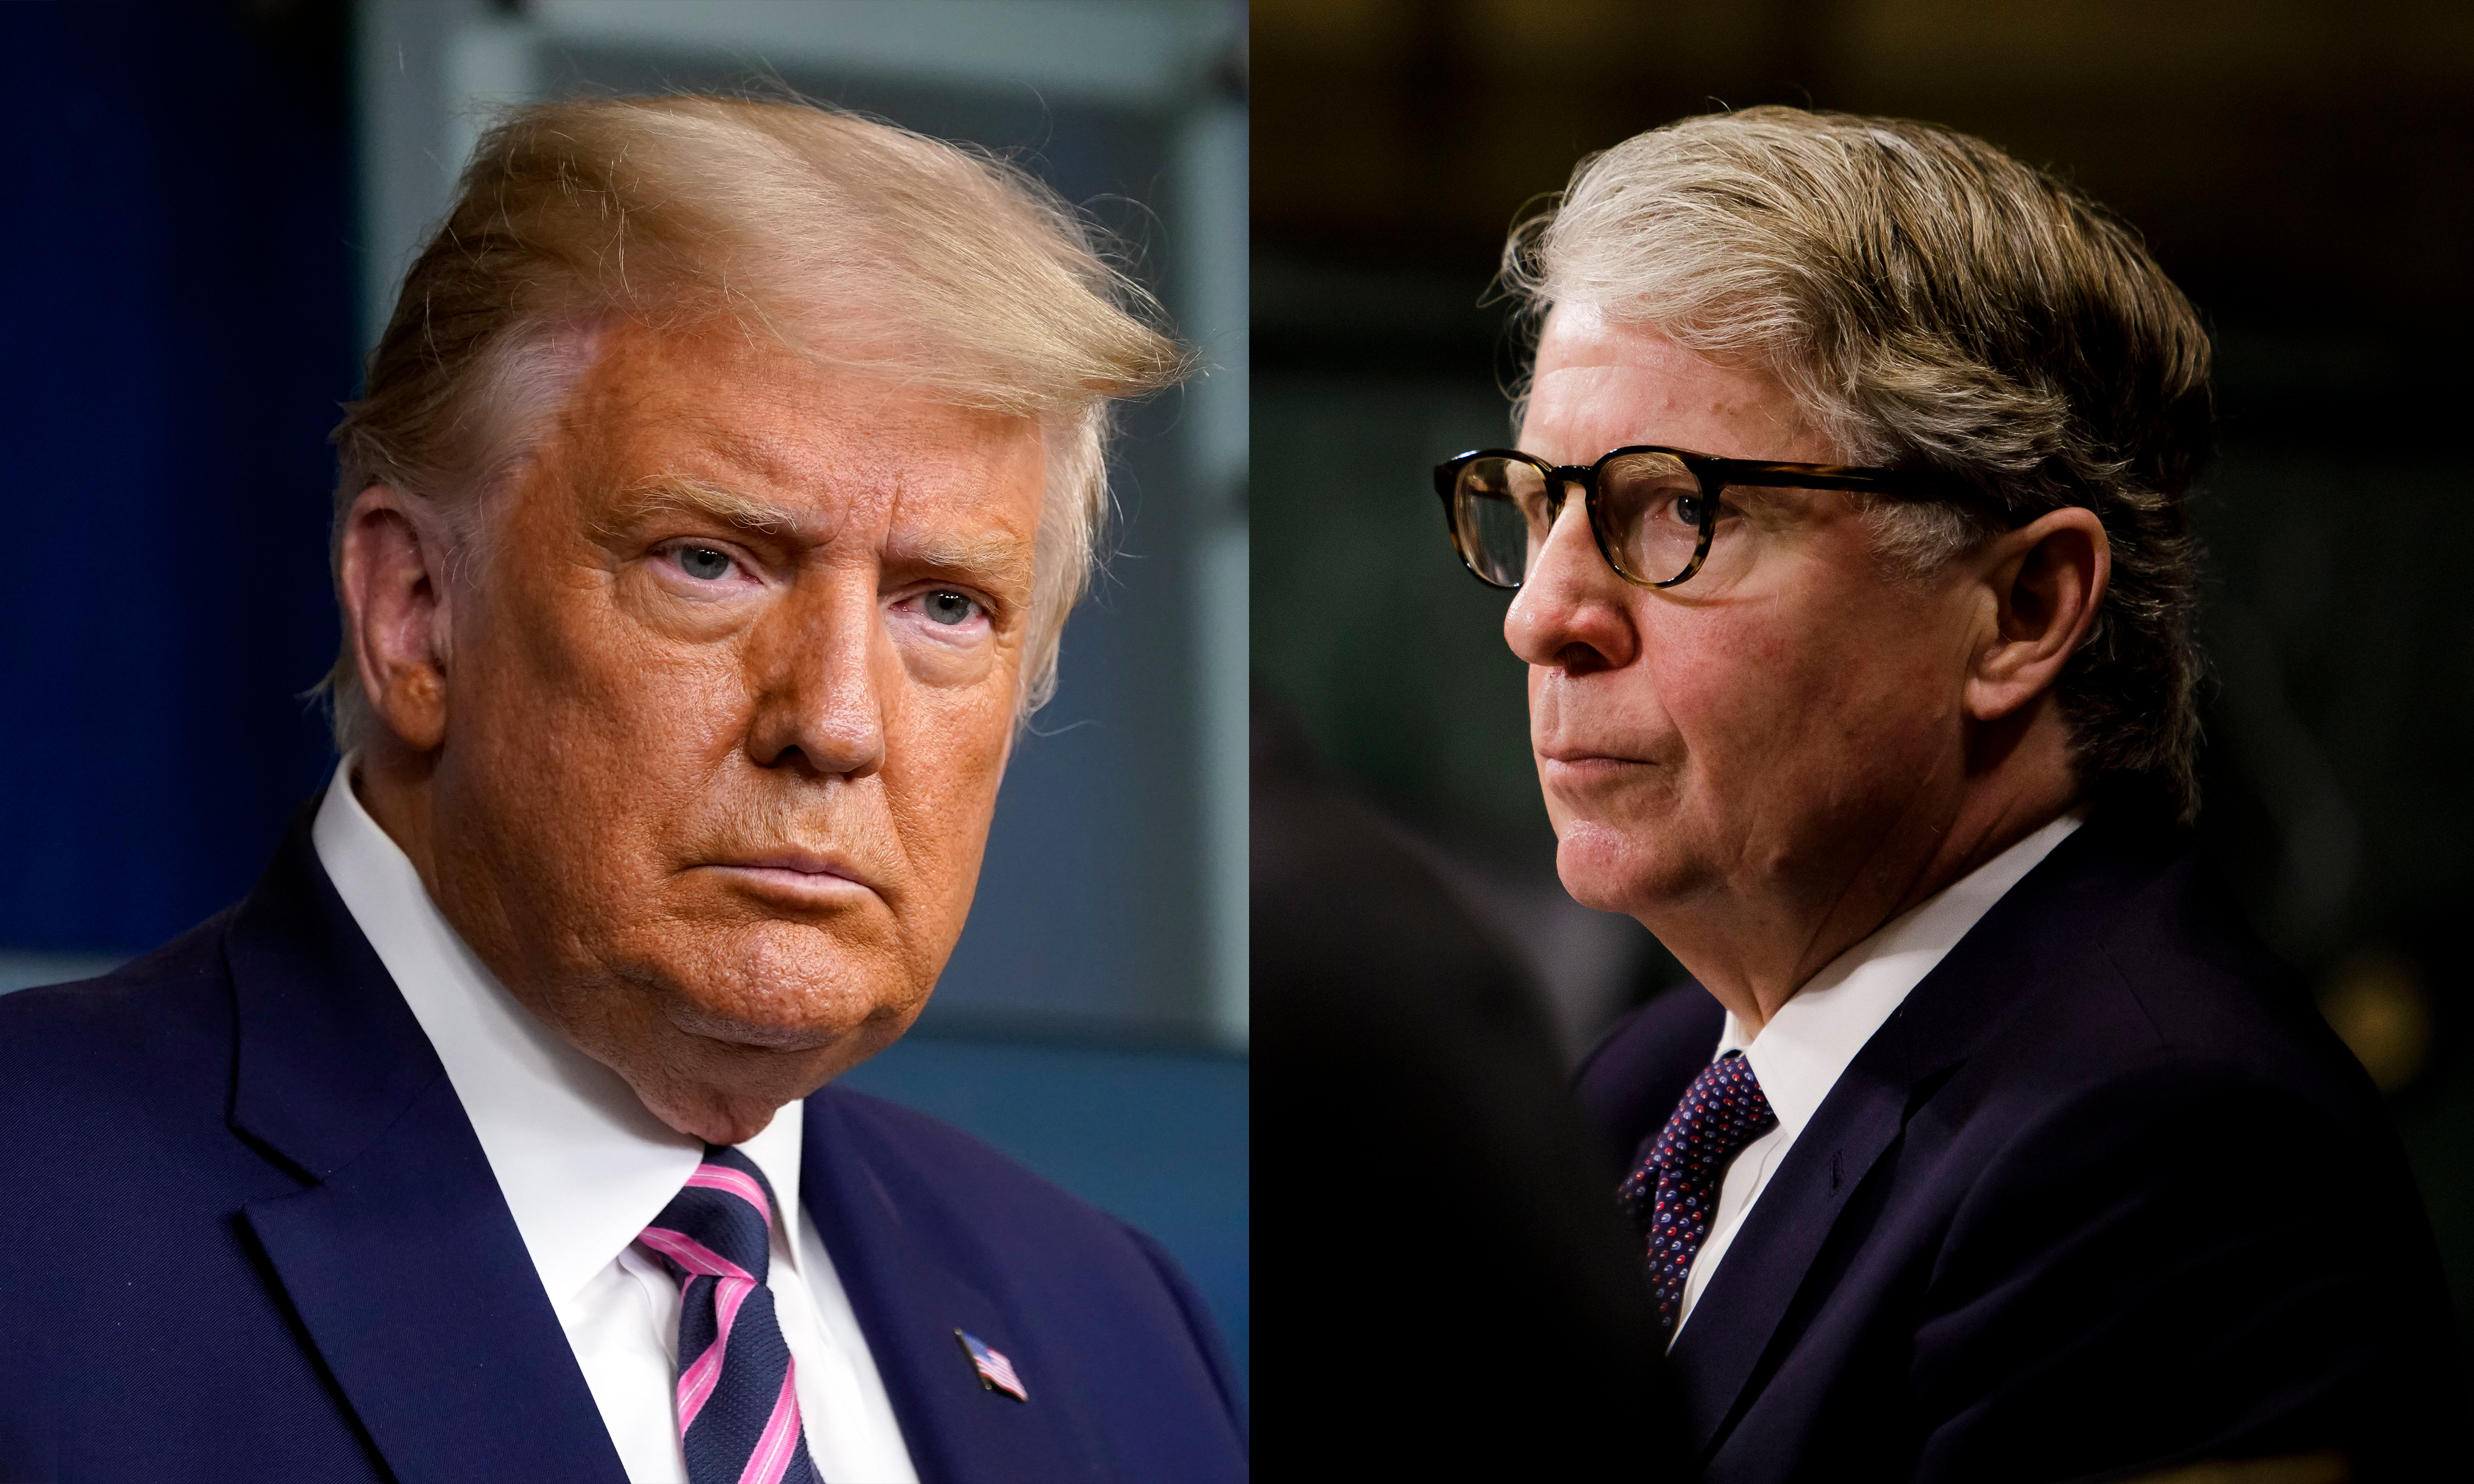 'Implausible Speculation': 2nd Circuit Panel Dismisses Trump Objections to Manhattan DA's Subpoena for Financial Records